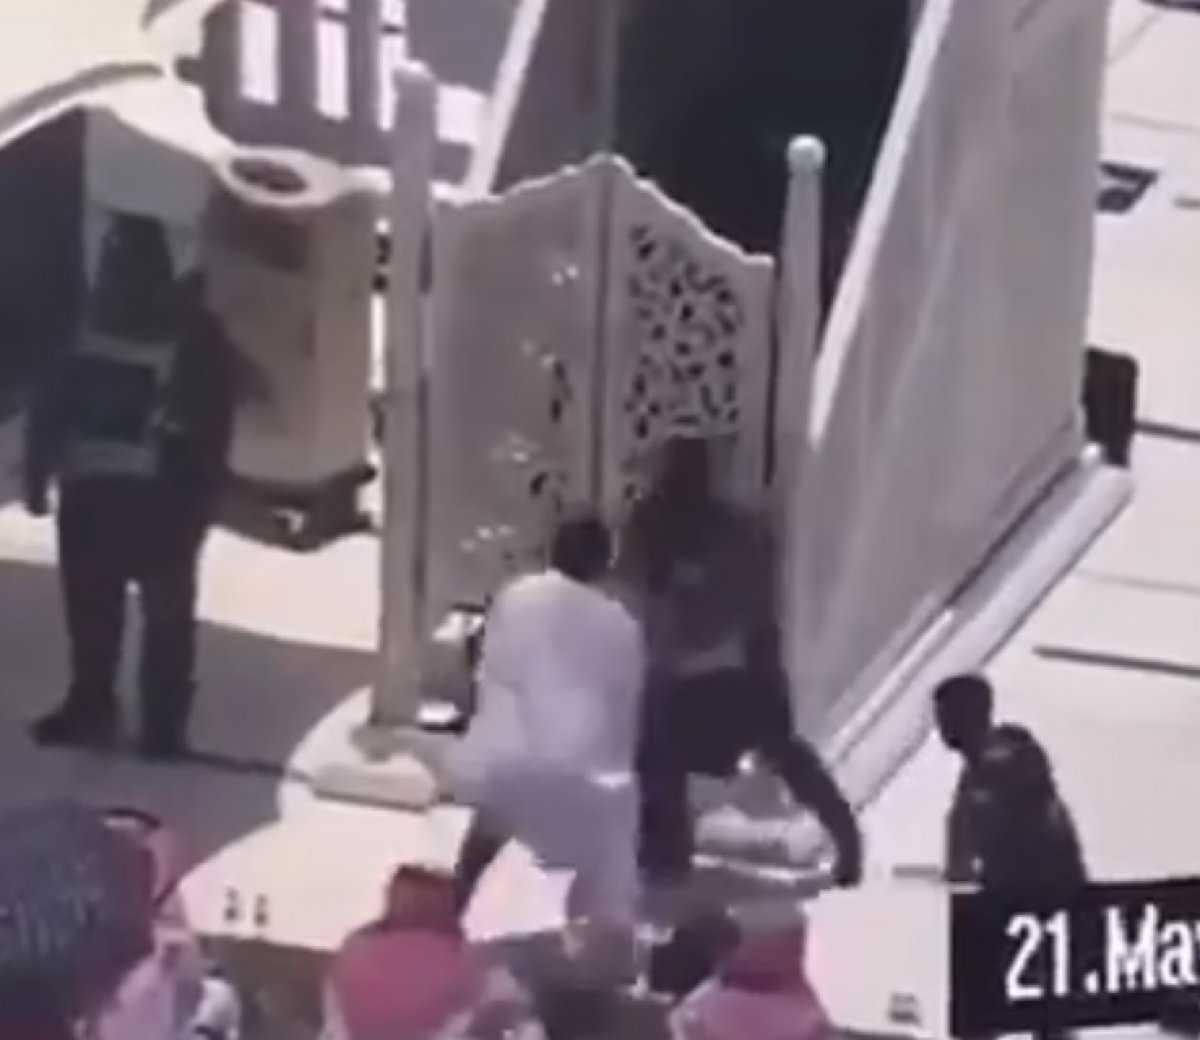 Knife attack attempt on Kaaba imam #1